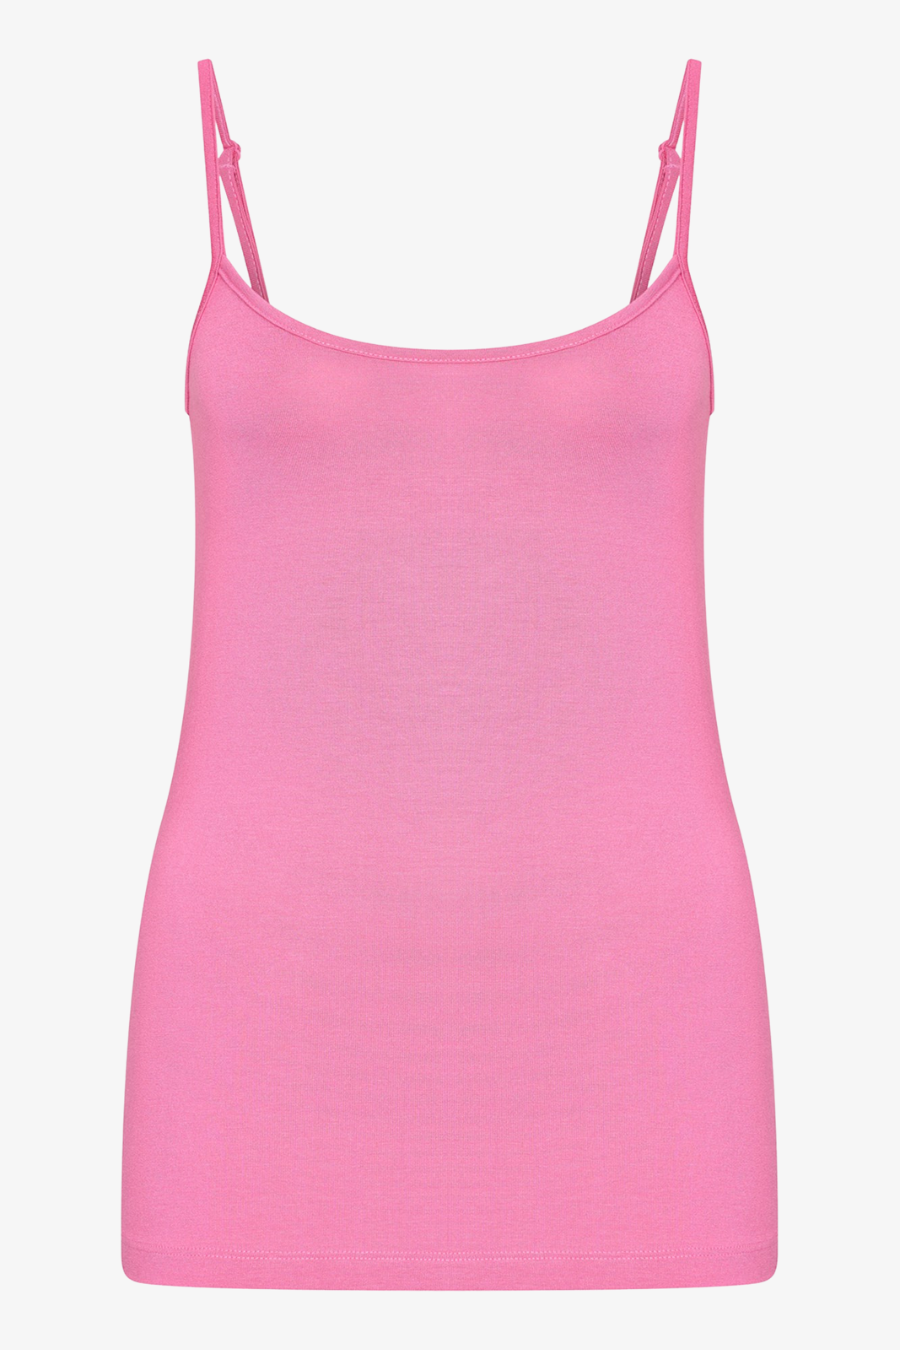 Cotton Thin Strap Tank Top in Better Be Butter